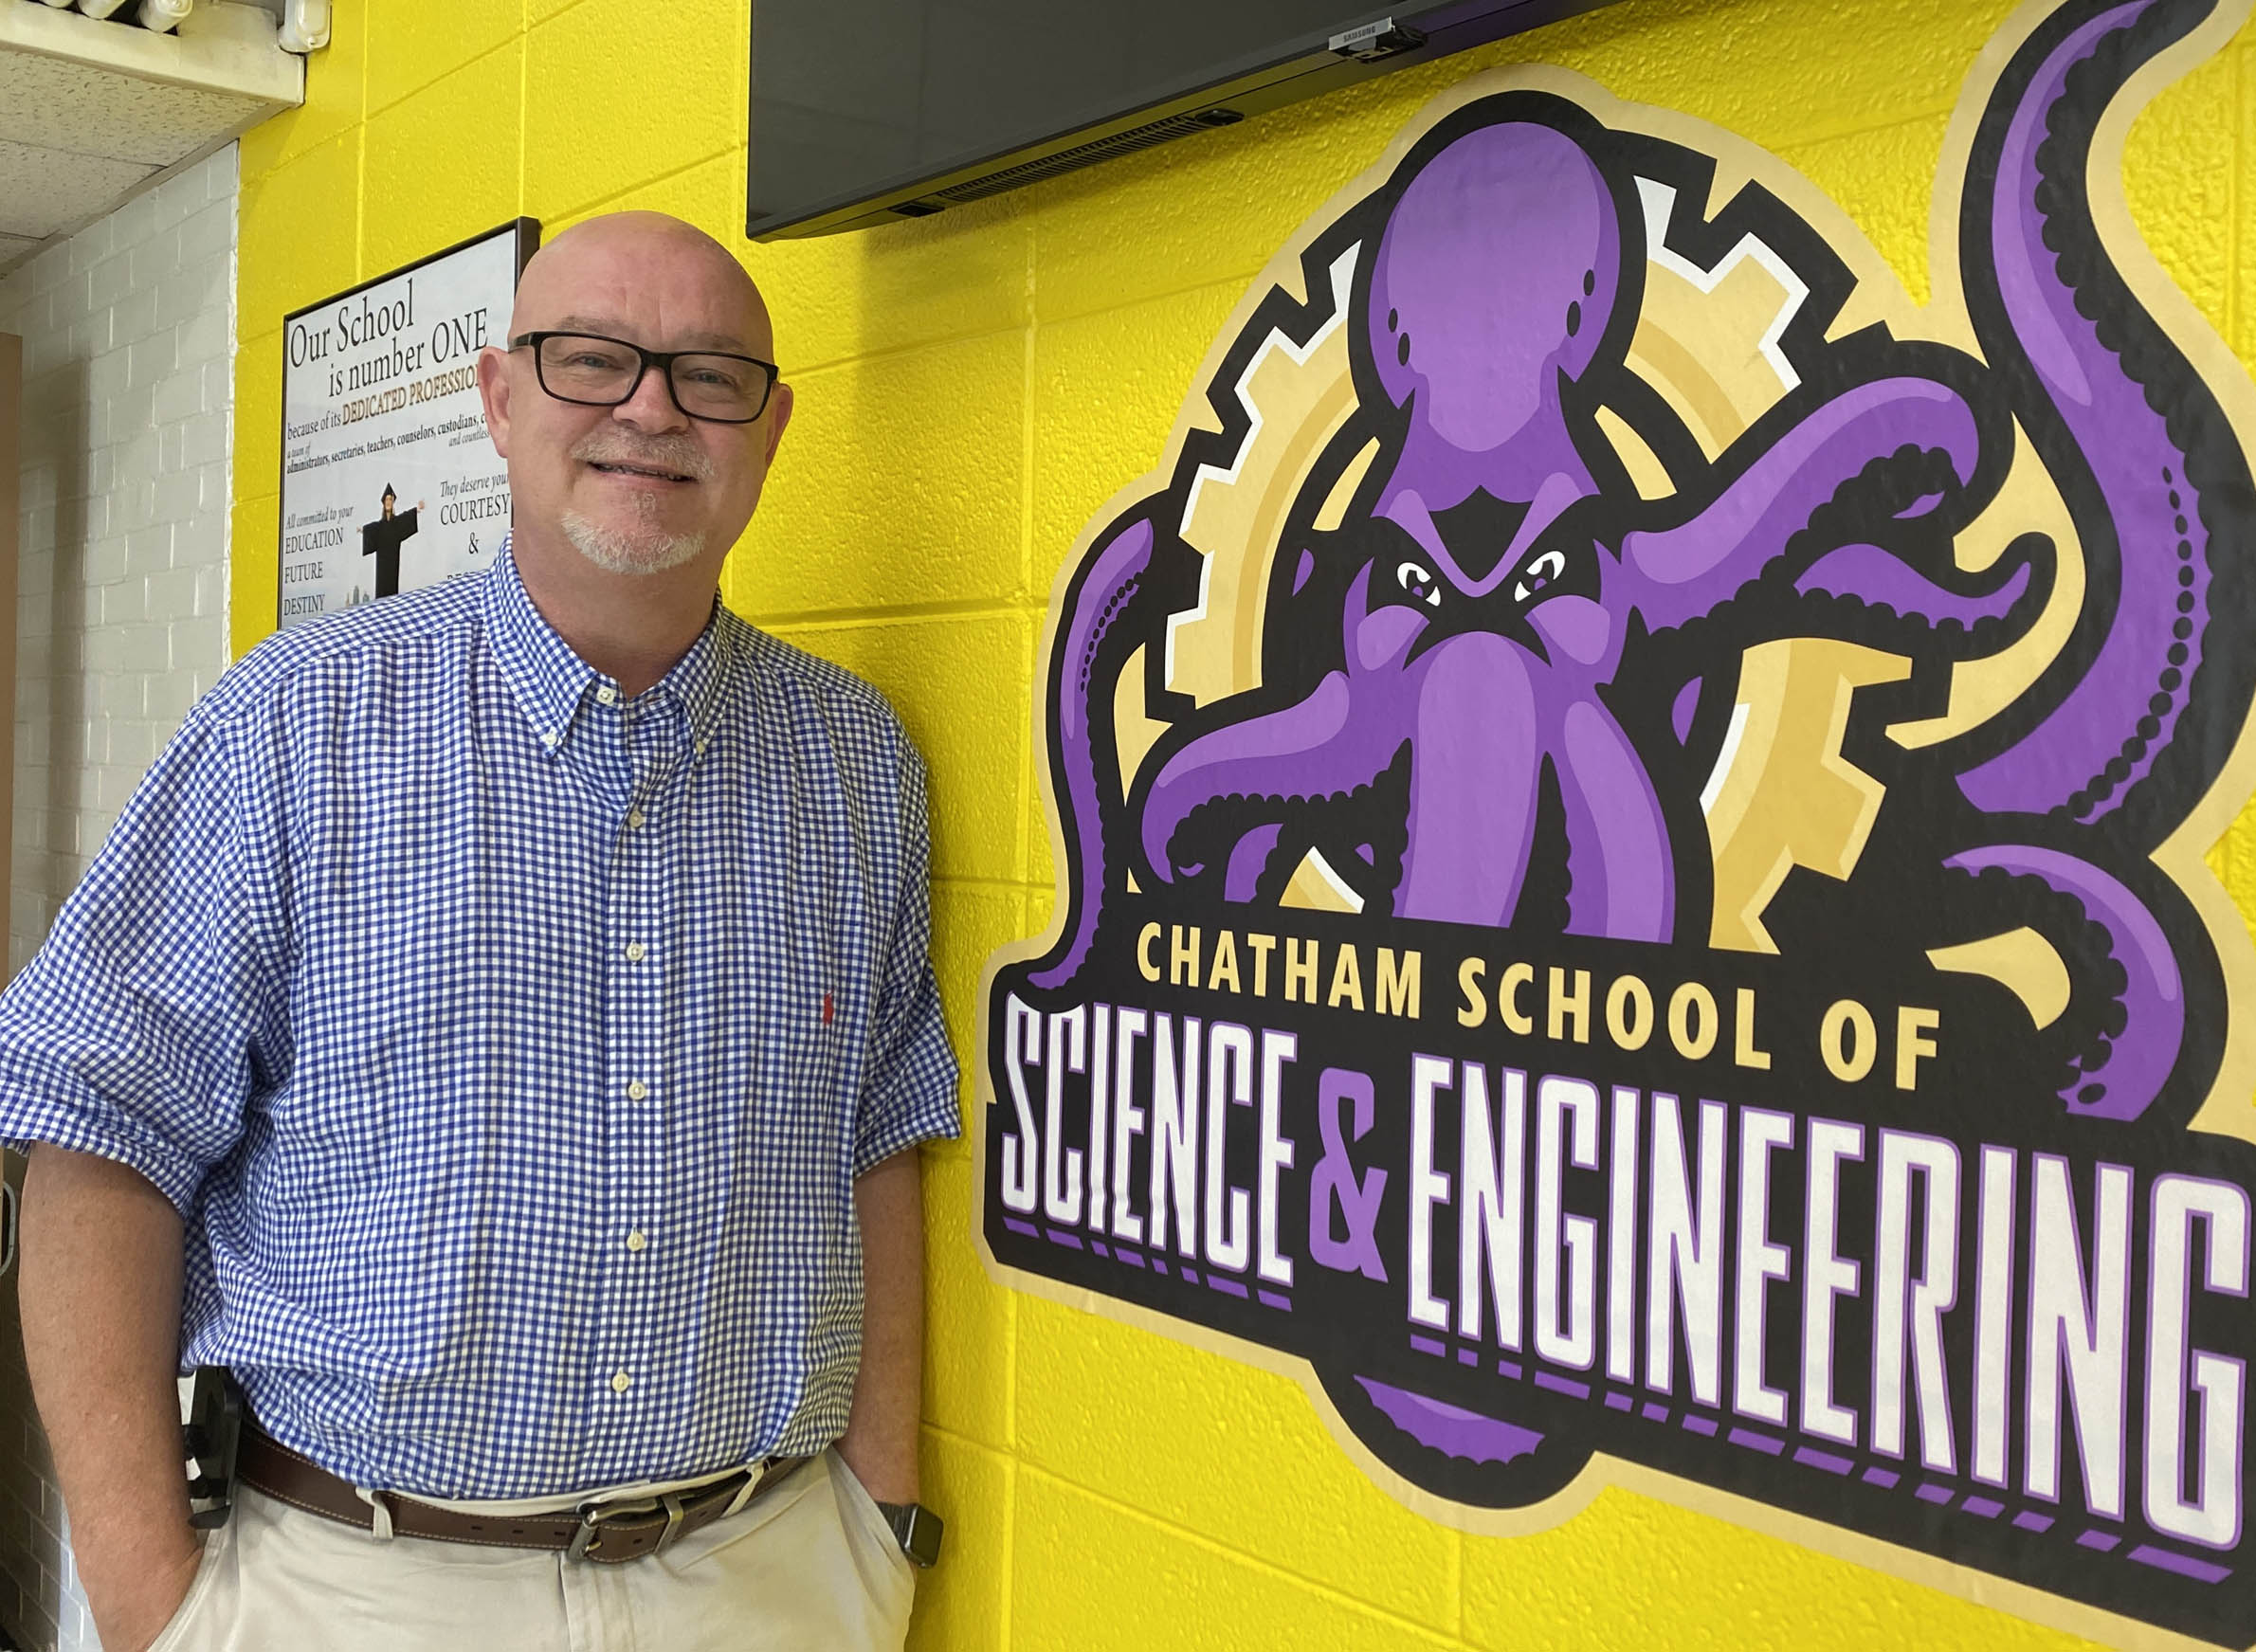 Read the full story, Chatham School of Science & Engineering shows tremendous progress